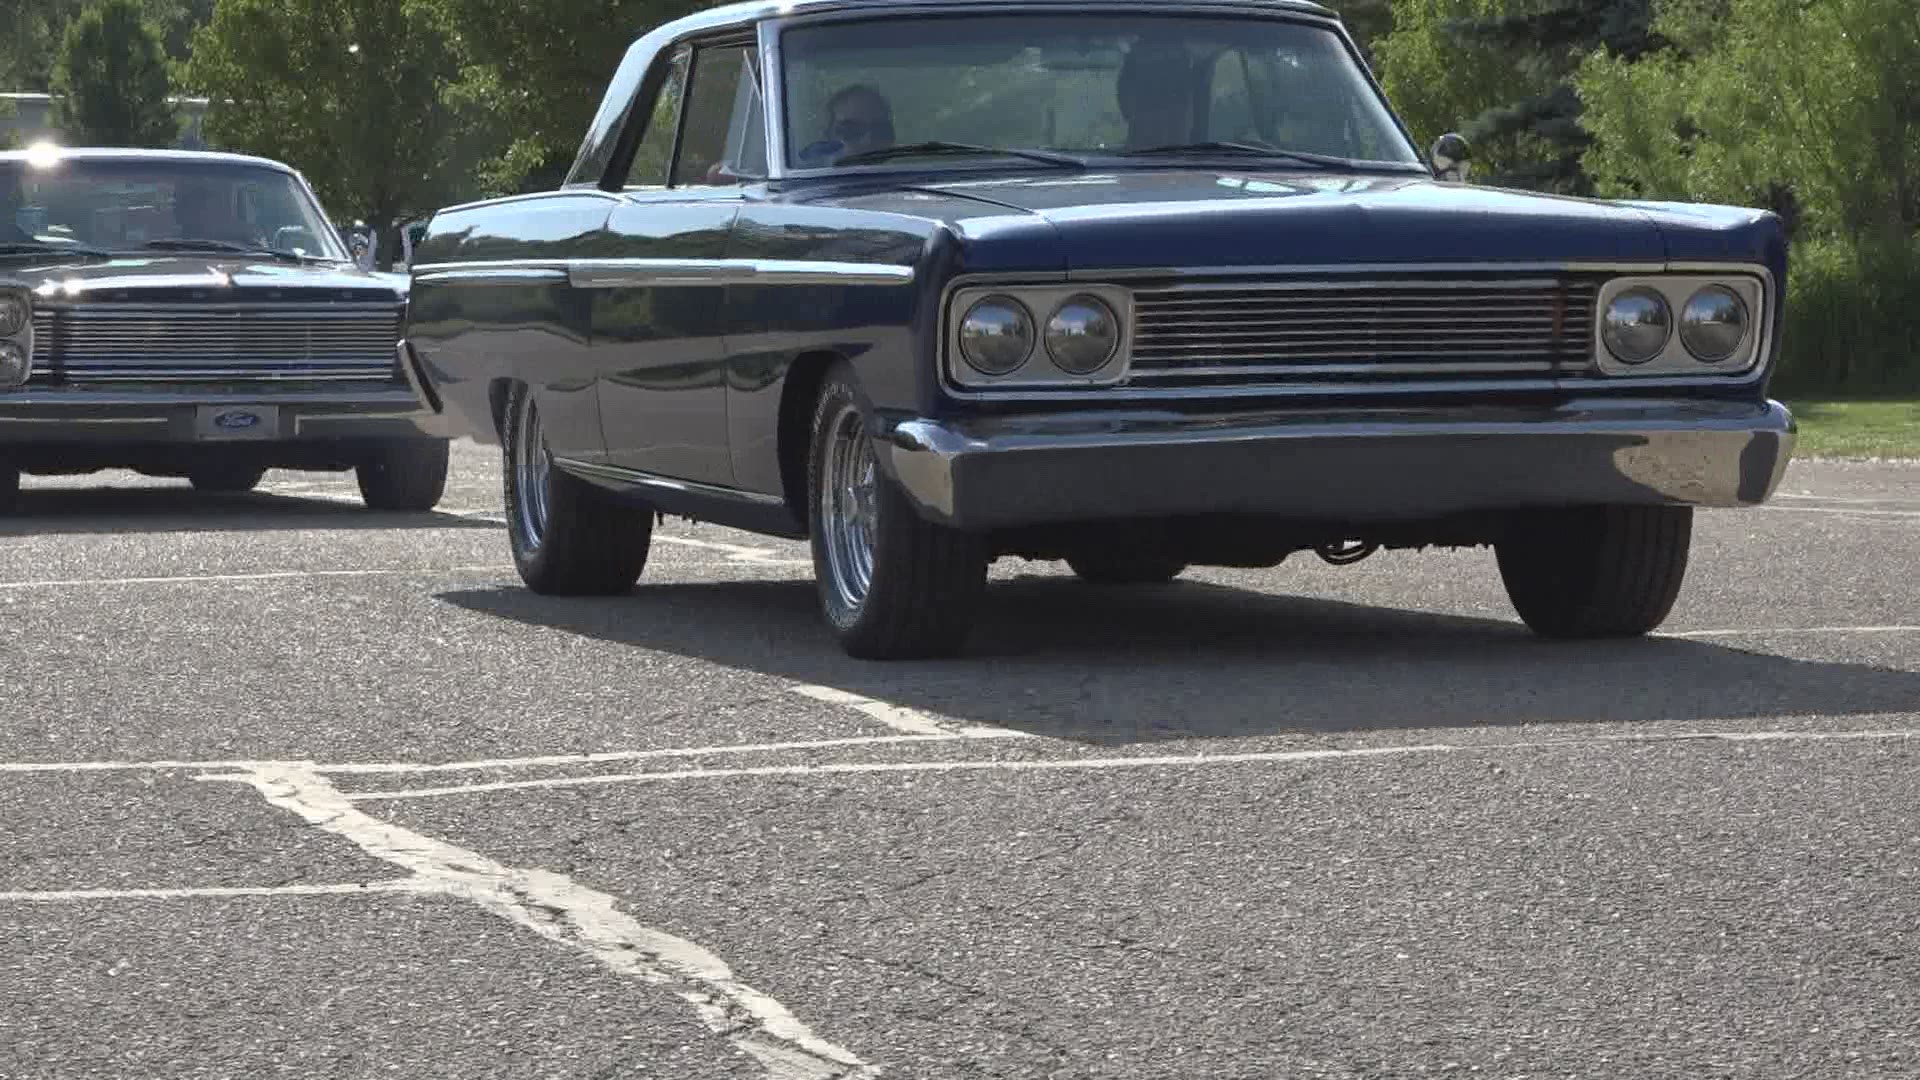 What was supposed to be a car show turned into a cruise around Hudsonville because of concerns about the virus.